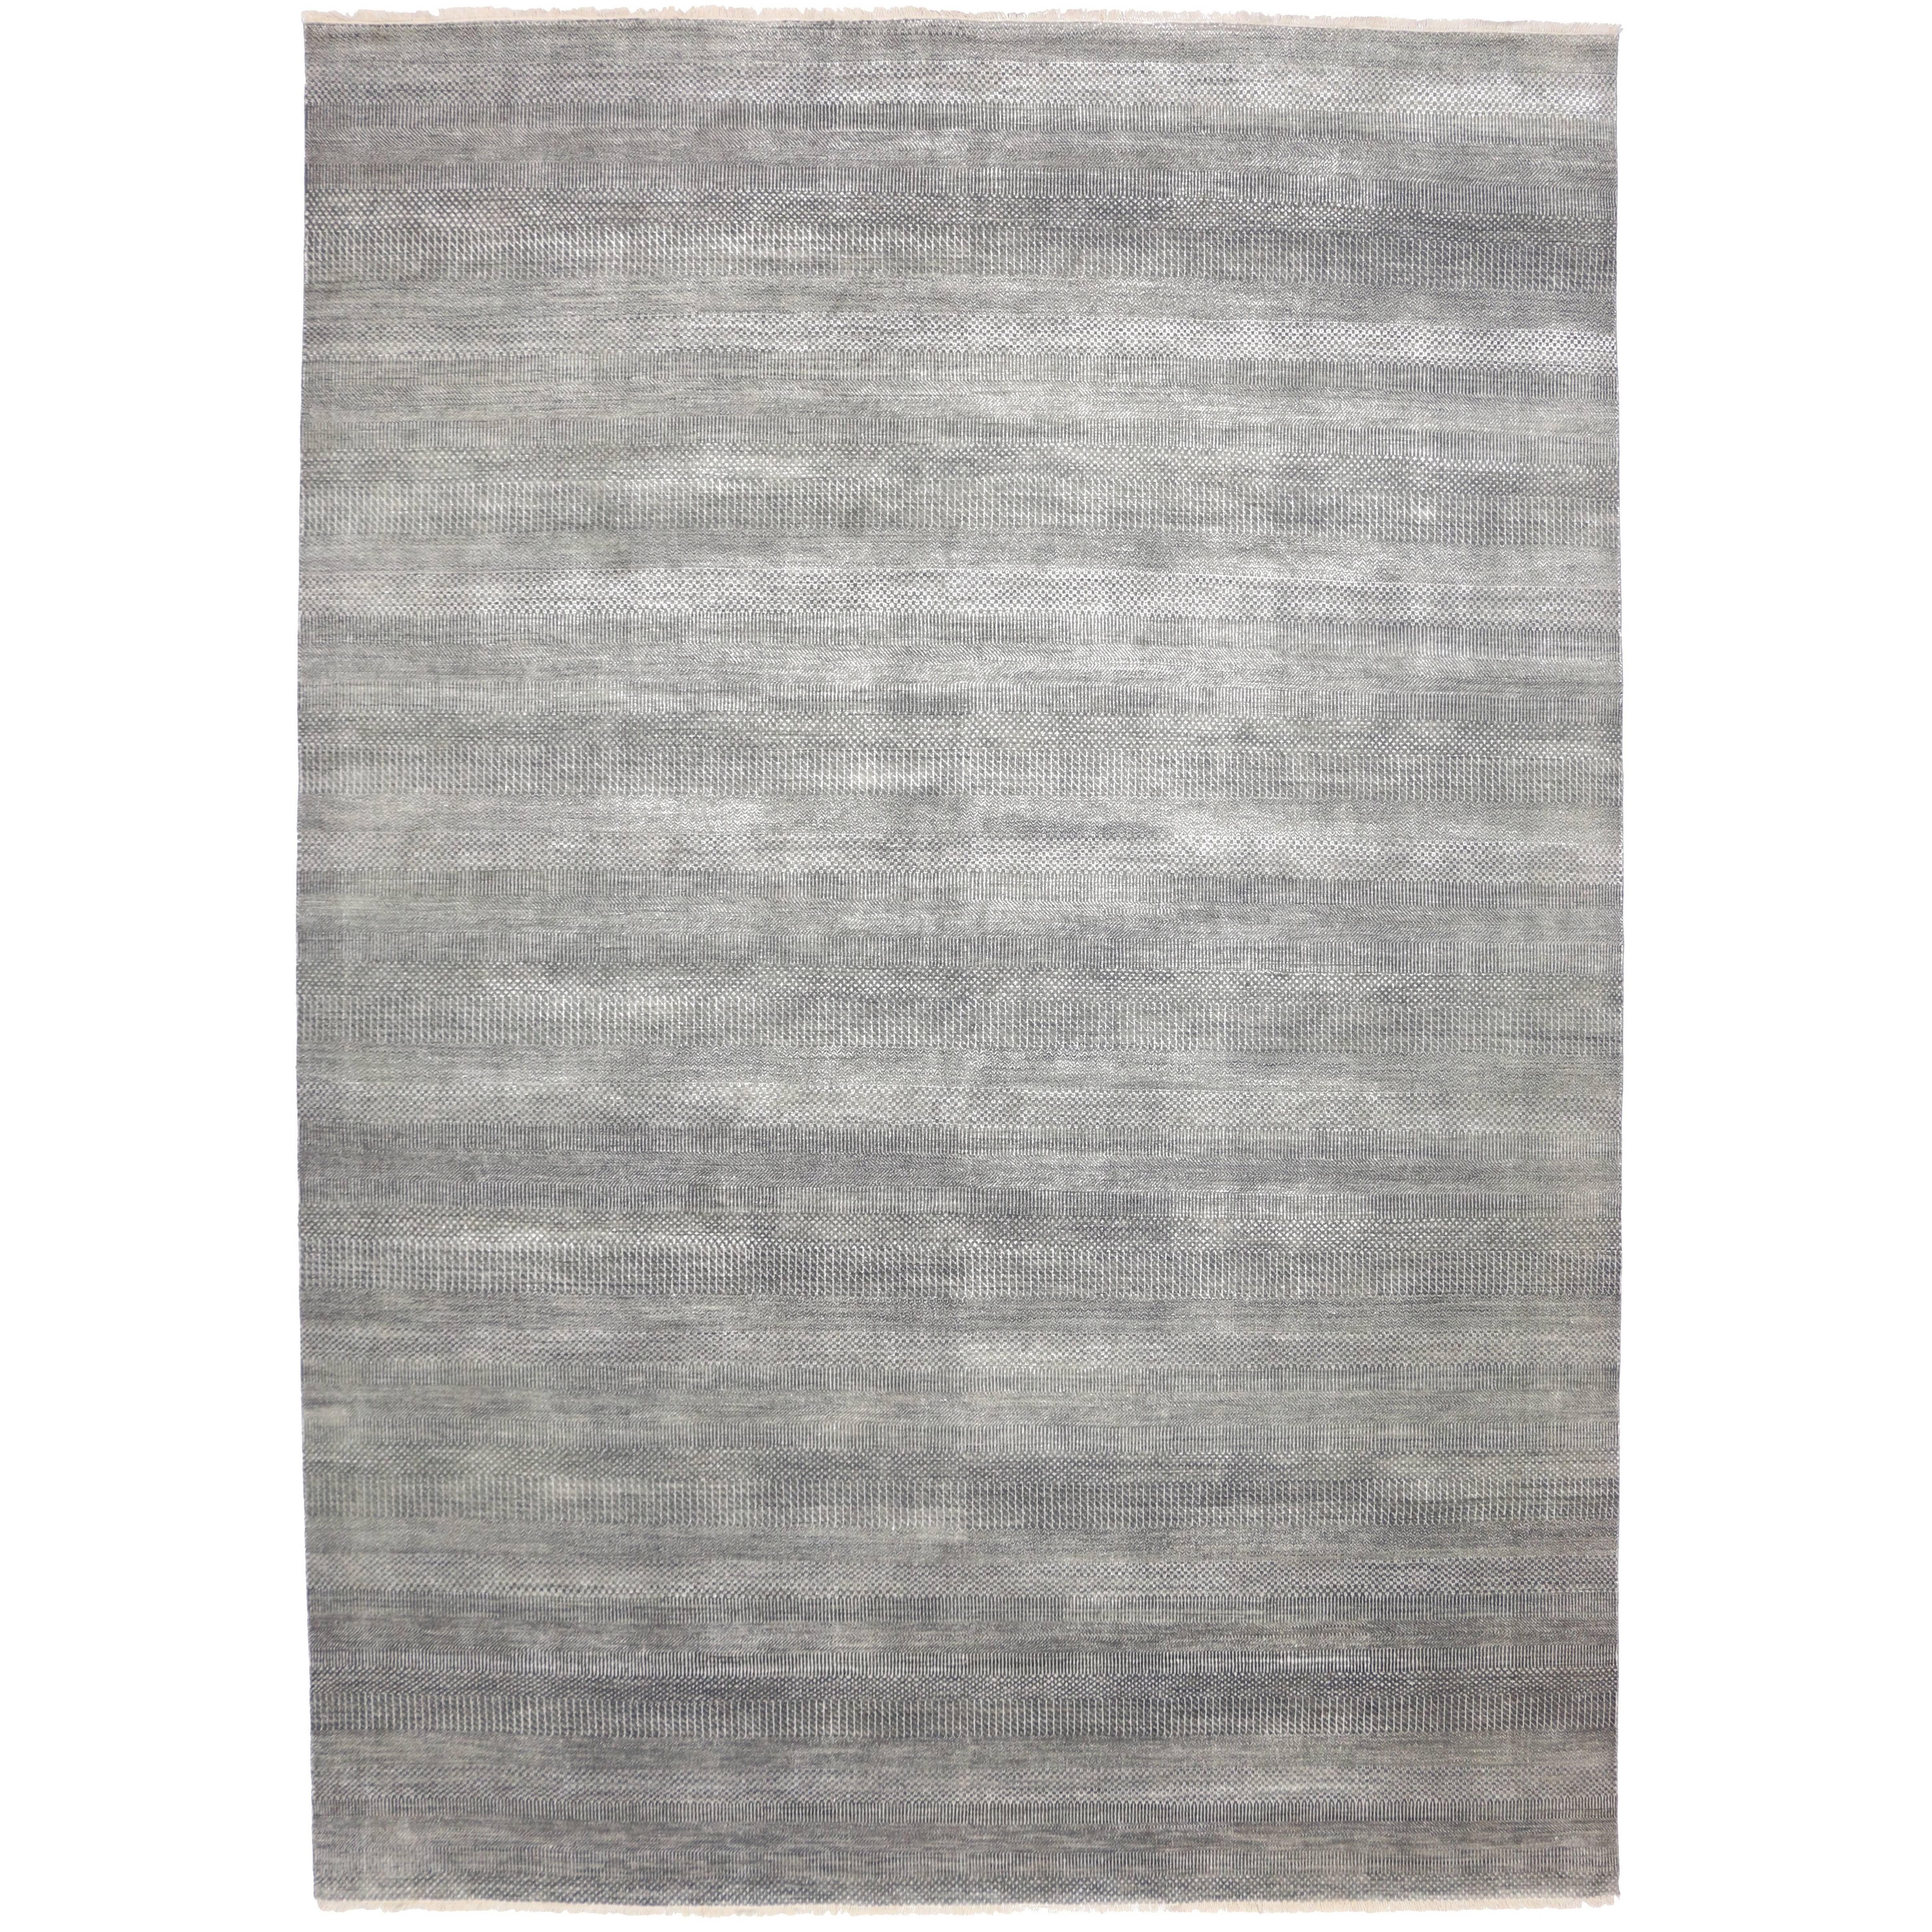 Transitional Gray Area Rug with Minimalist Style, Contemporary Bauhaus Design